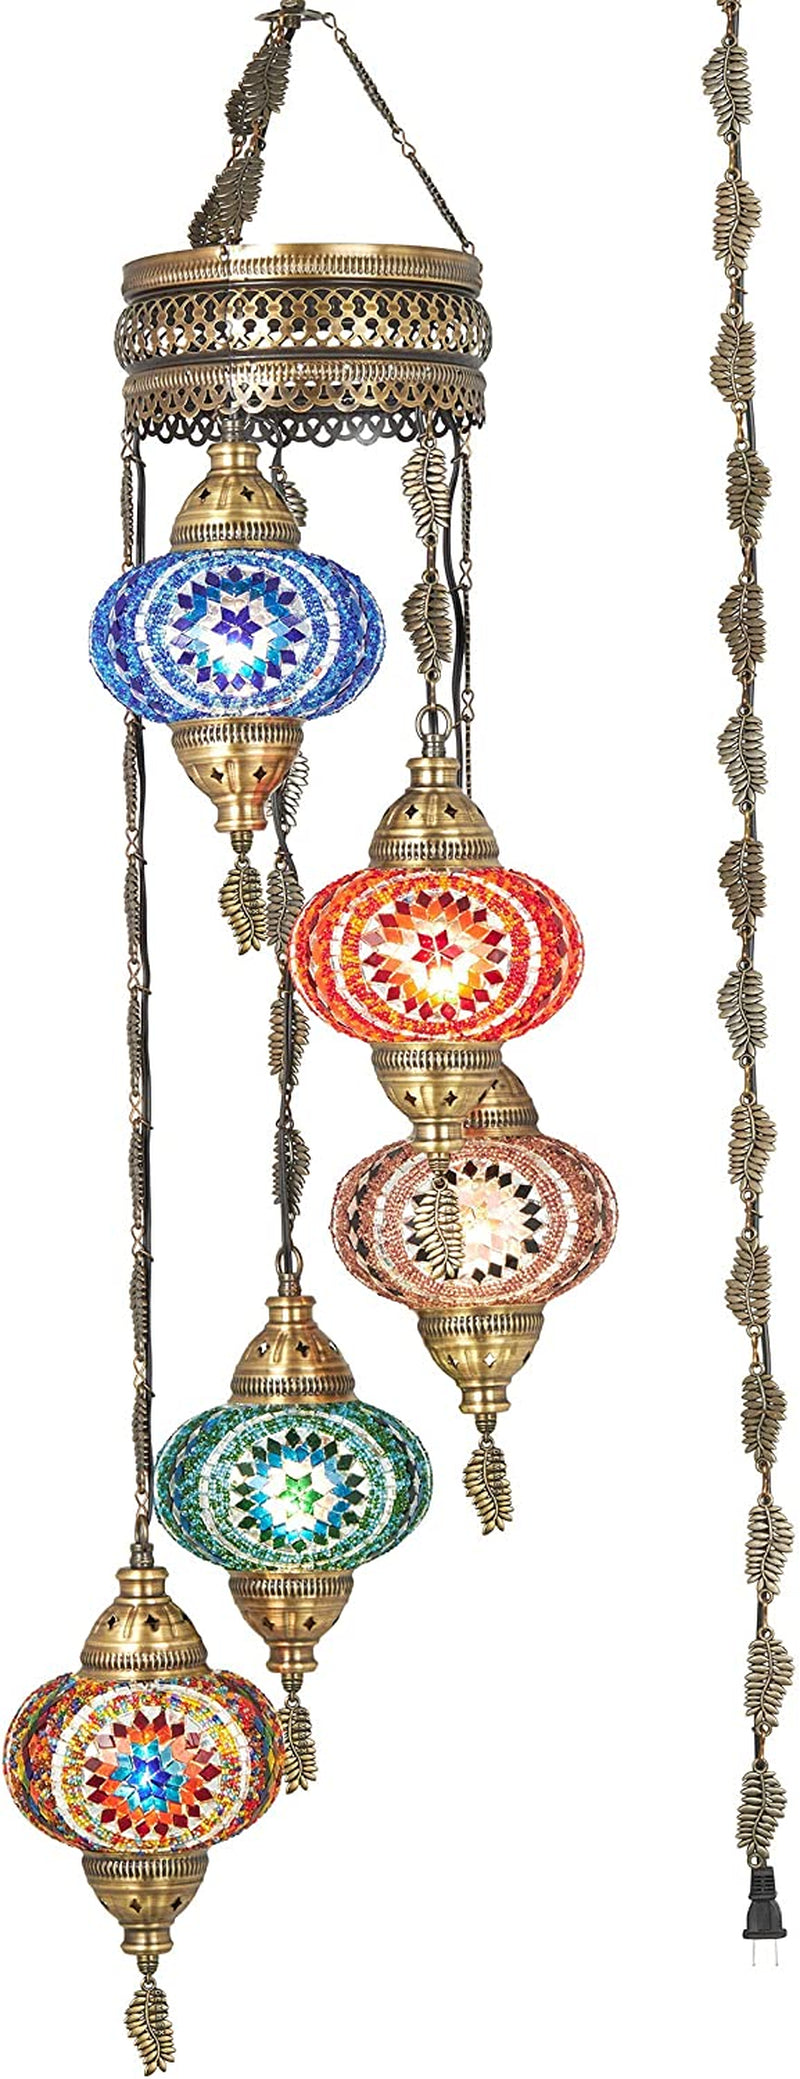 DEMMEX Turkish Moroccan Mosaic Hardwired or Swag Plug in Chandelier Light Ceiling Hanging Lamp Pendant Fixture, 5 Big Globes (5 X 7 Globes Swag)